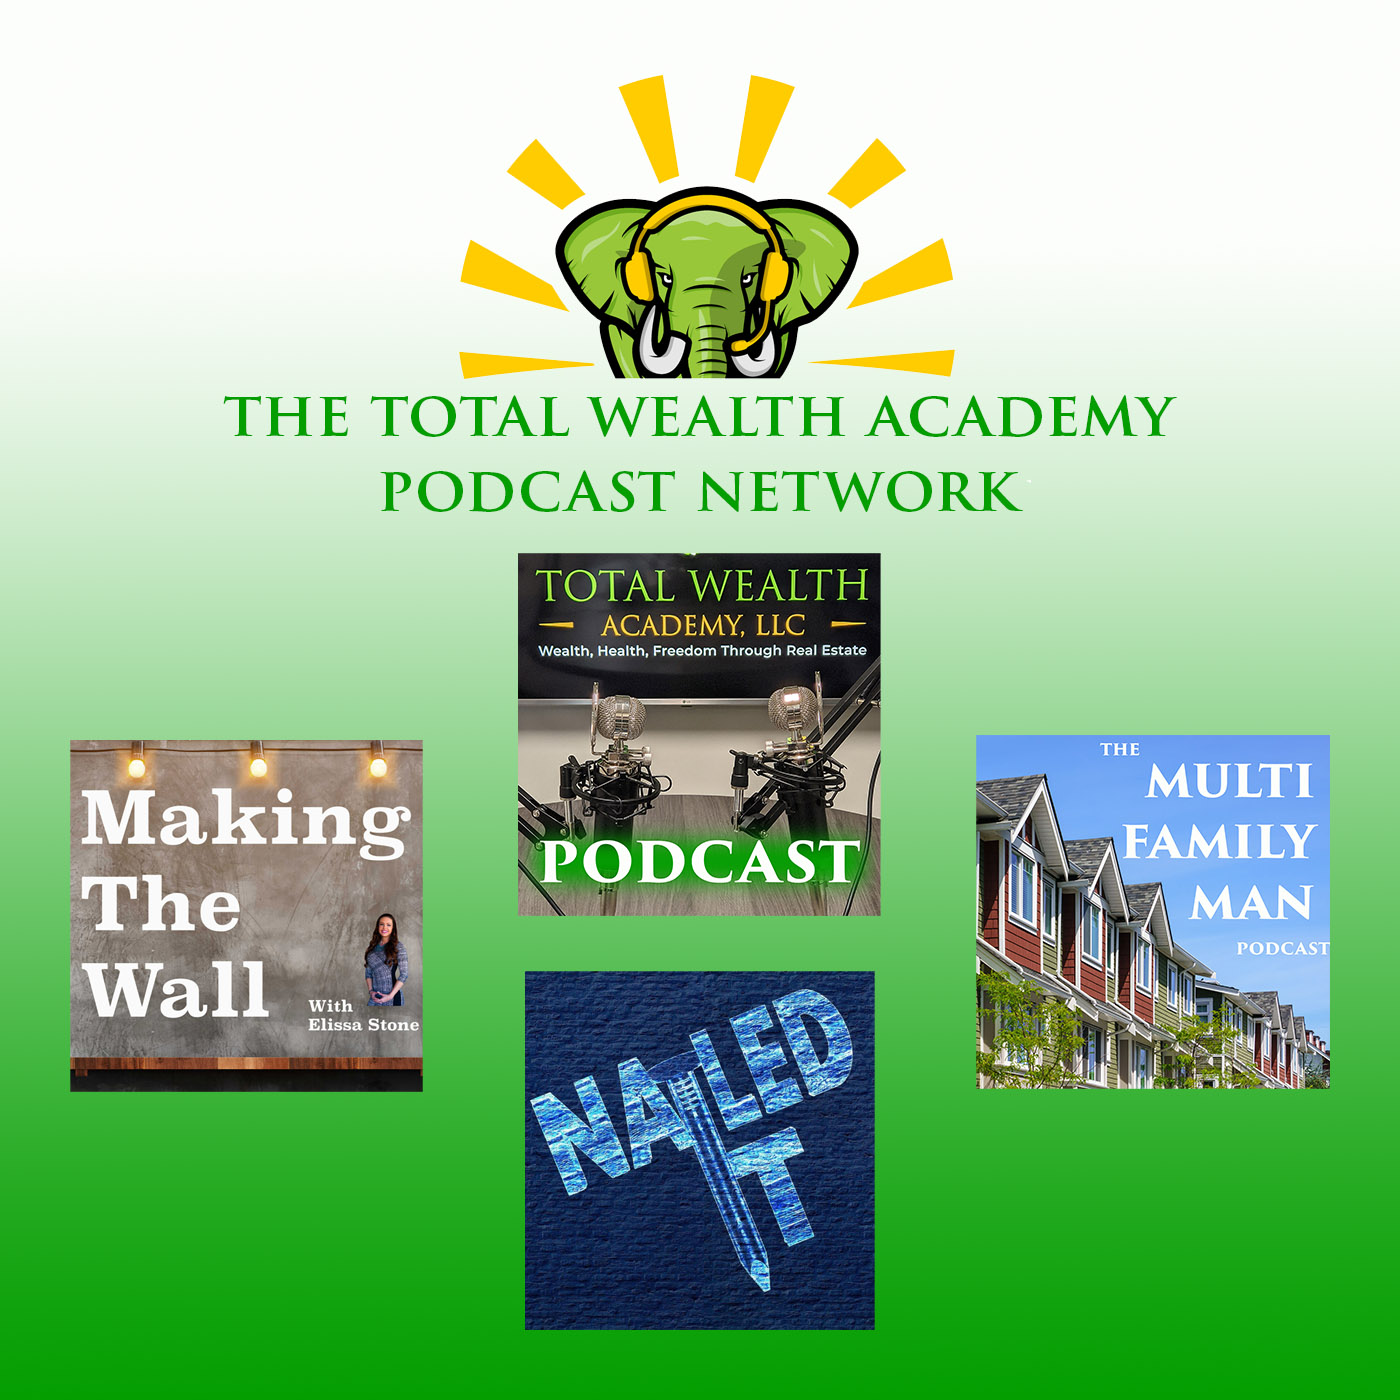 The Total Wealth Academy Podcast Network